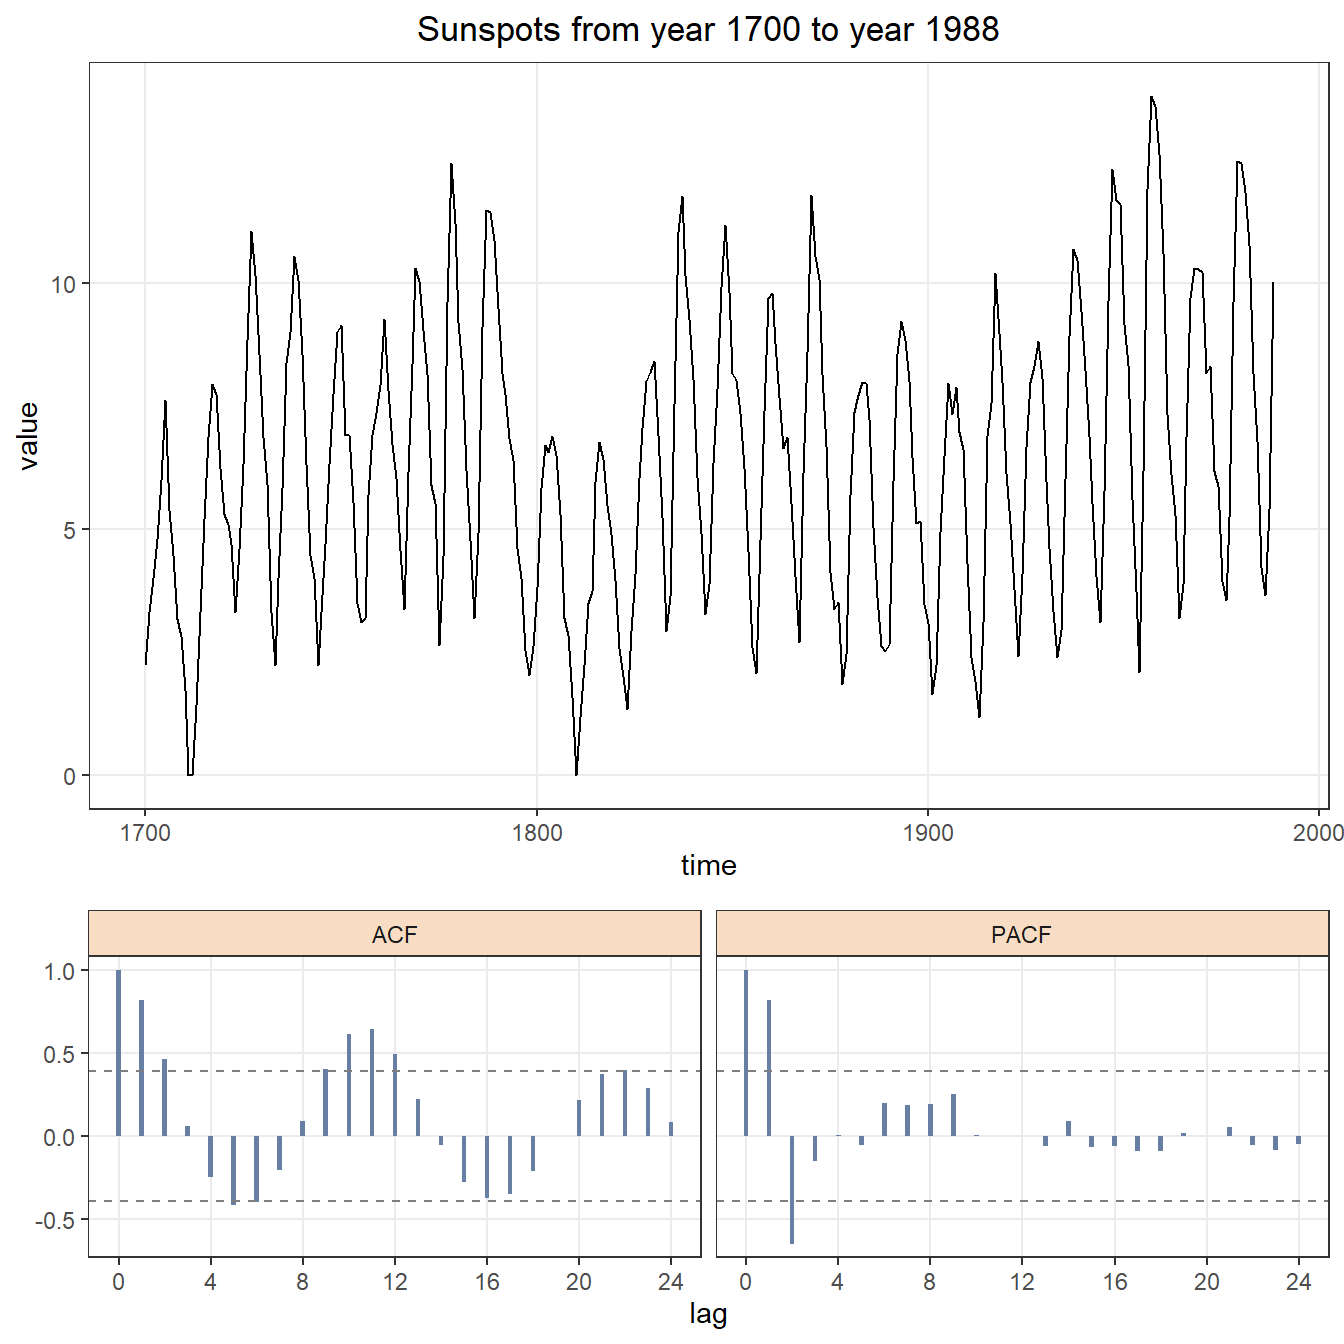 Square rooted time series with ACF and PACF